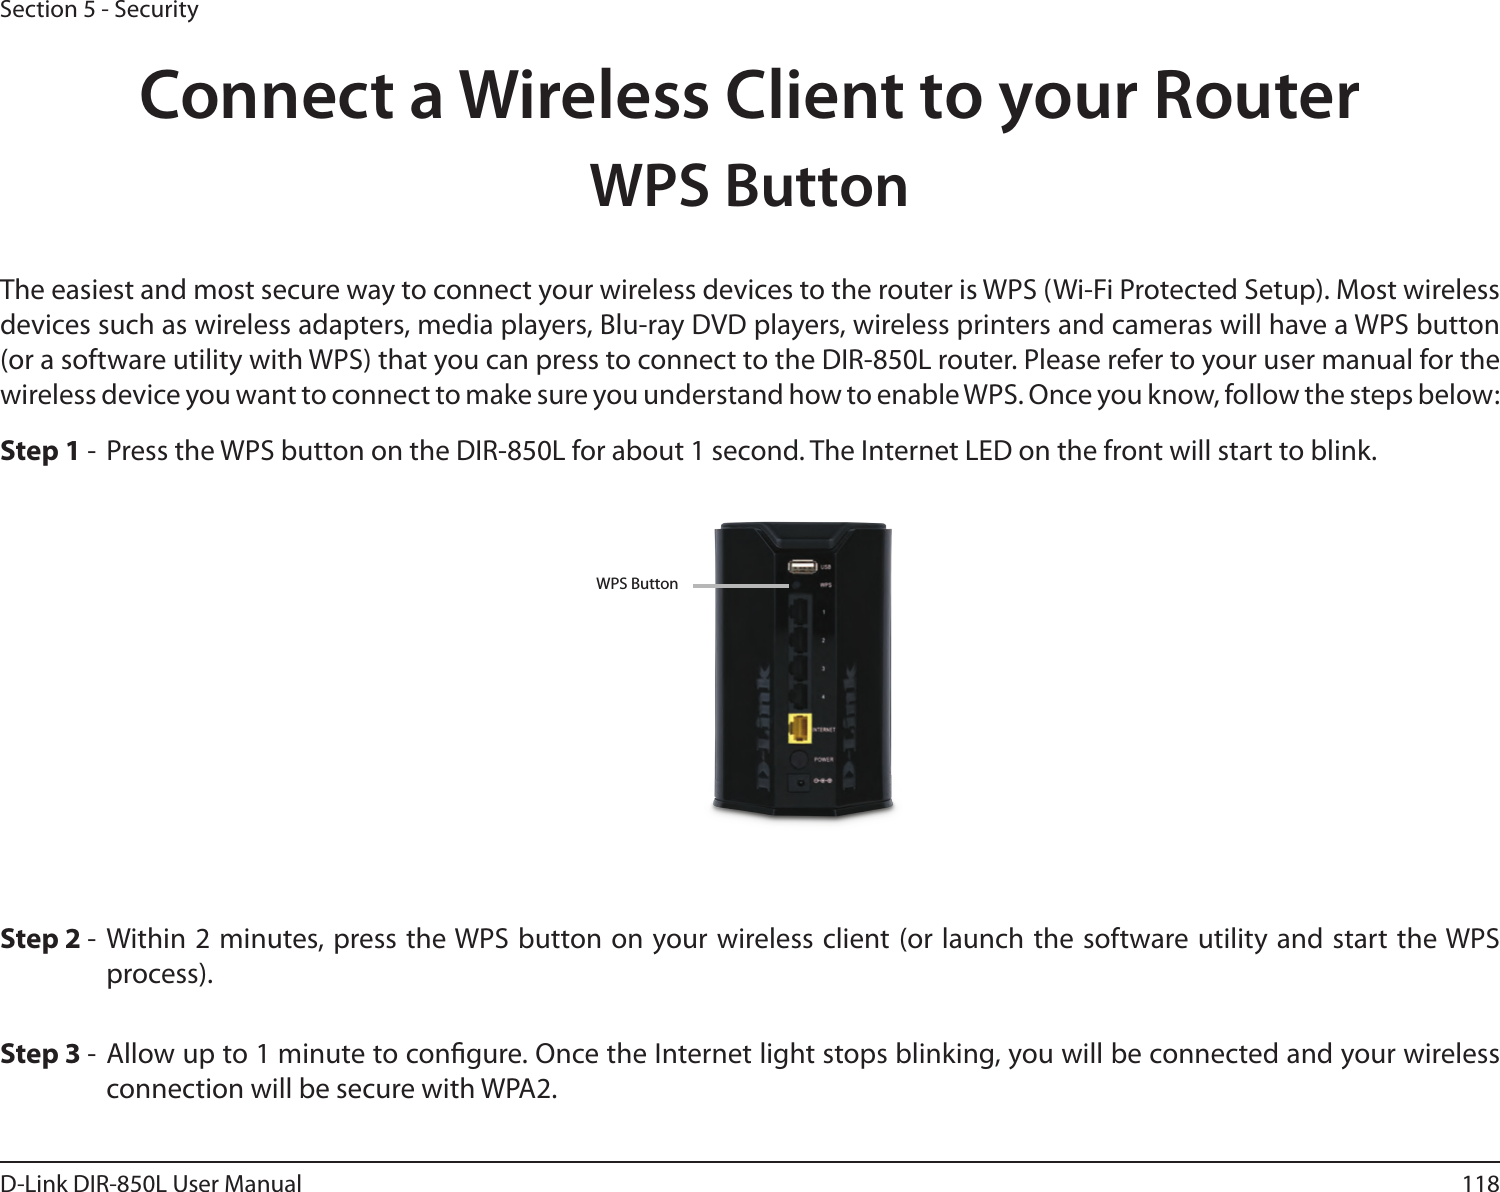 118D-Link DIR-850L User ManualSection 5 - SecurityConnect a Wireless Client to your RouterWPS ButtonStep 2 -  Within 2 minutes, press the WPS button on your wireless client (or launch the software utility and start the WPS process).The easiest and most secure way to connect your wireless devices to the router is WPS (Wi-Fi Protected Setup). Most wireless devices such as wireless adapters, media players, Blu-ray DVD players, wireless printers and cameras will have a WPS button (or a software utility with WPS) that you can press to connect to the DIR-850L router. Please refer to your user manual for the wireless device you want to connect to make sure you understand how to enable WPS. Once you know, follow the steps below:Step 1 -  Press the WPS button on the DIR-850L for about 1 second. The Internet LED on the front will start to blink.Step 3 - Allow up to 1 minute to congure. Once the Internet light stops blinking, you will be connected and your wireless connection will be secure with WPA2.WPS Button